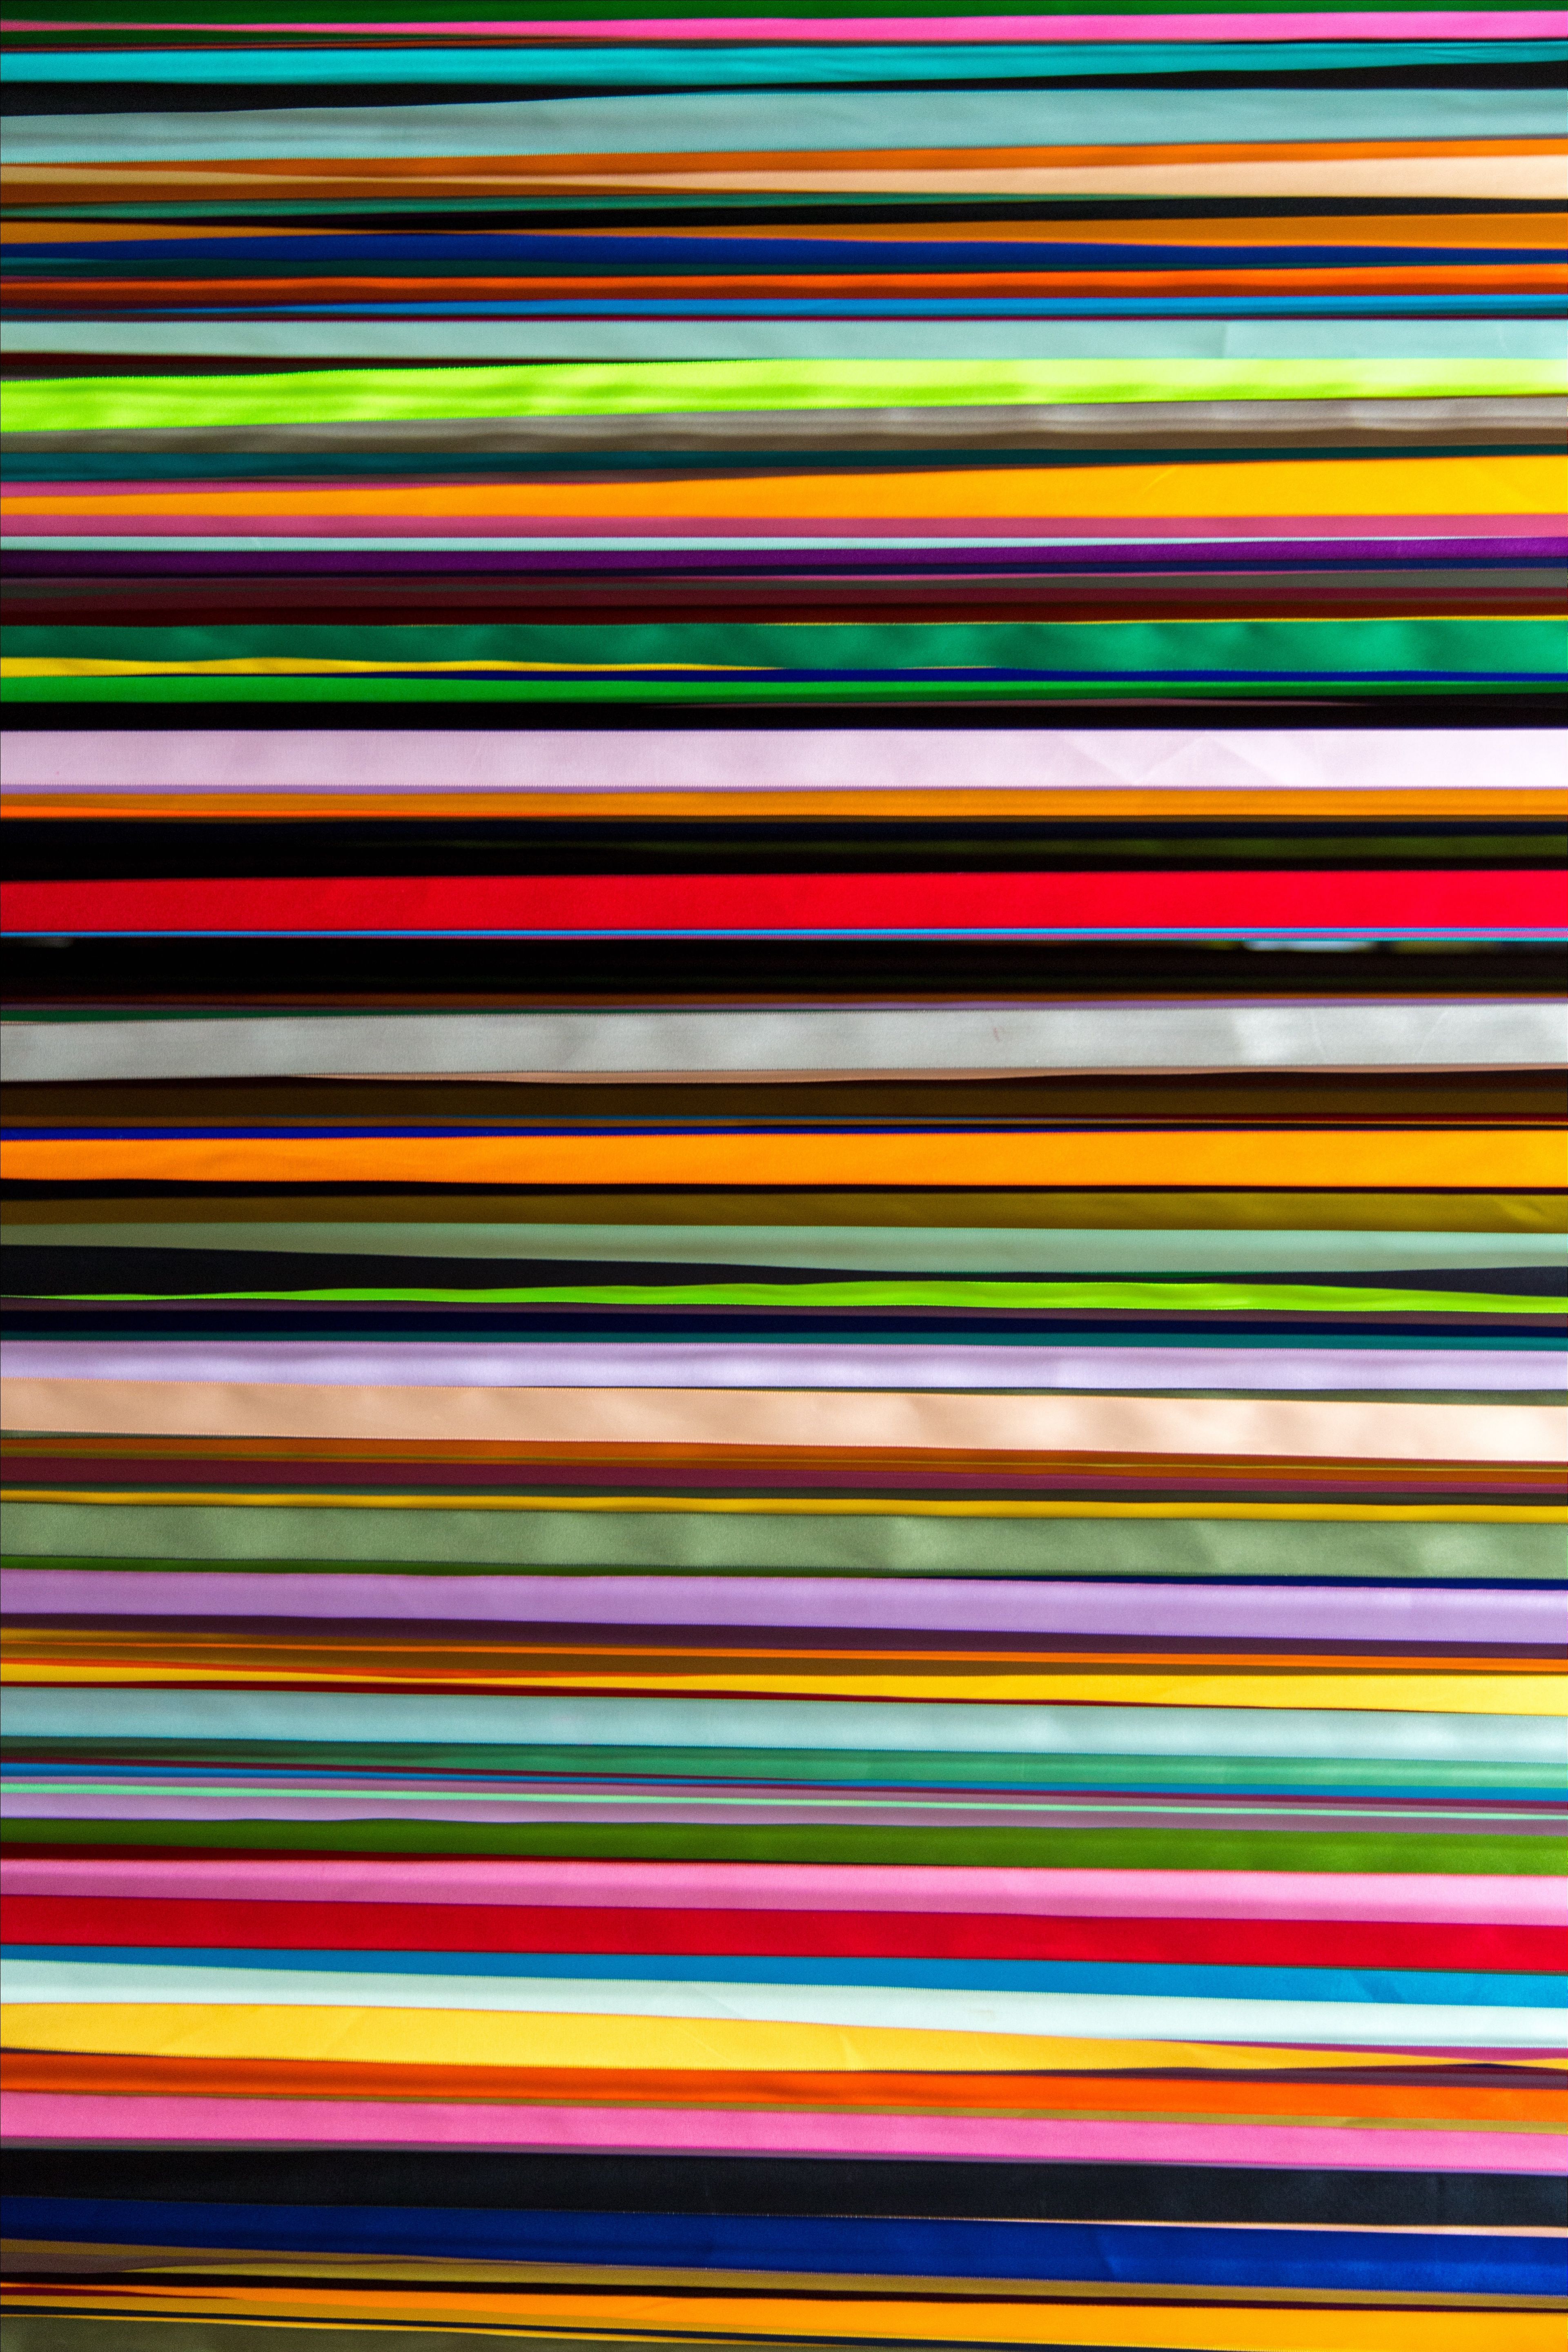 stripes, rainbow, bright, streaks, textures, multicolored, texture, lines, iridescent, ribbons